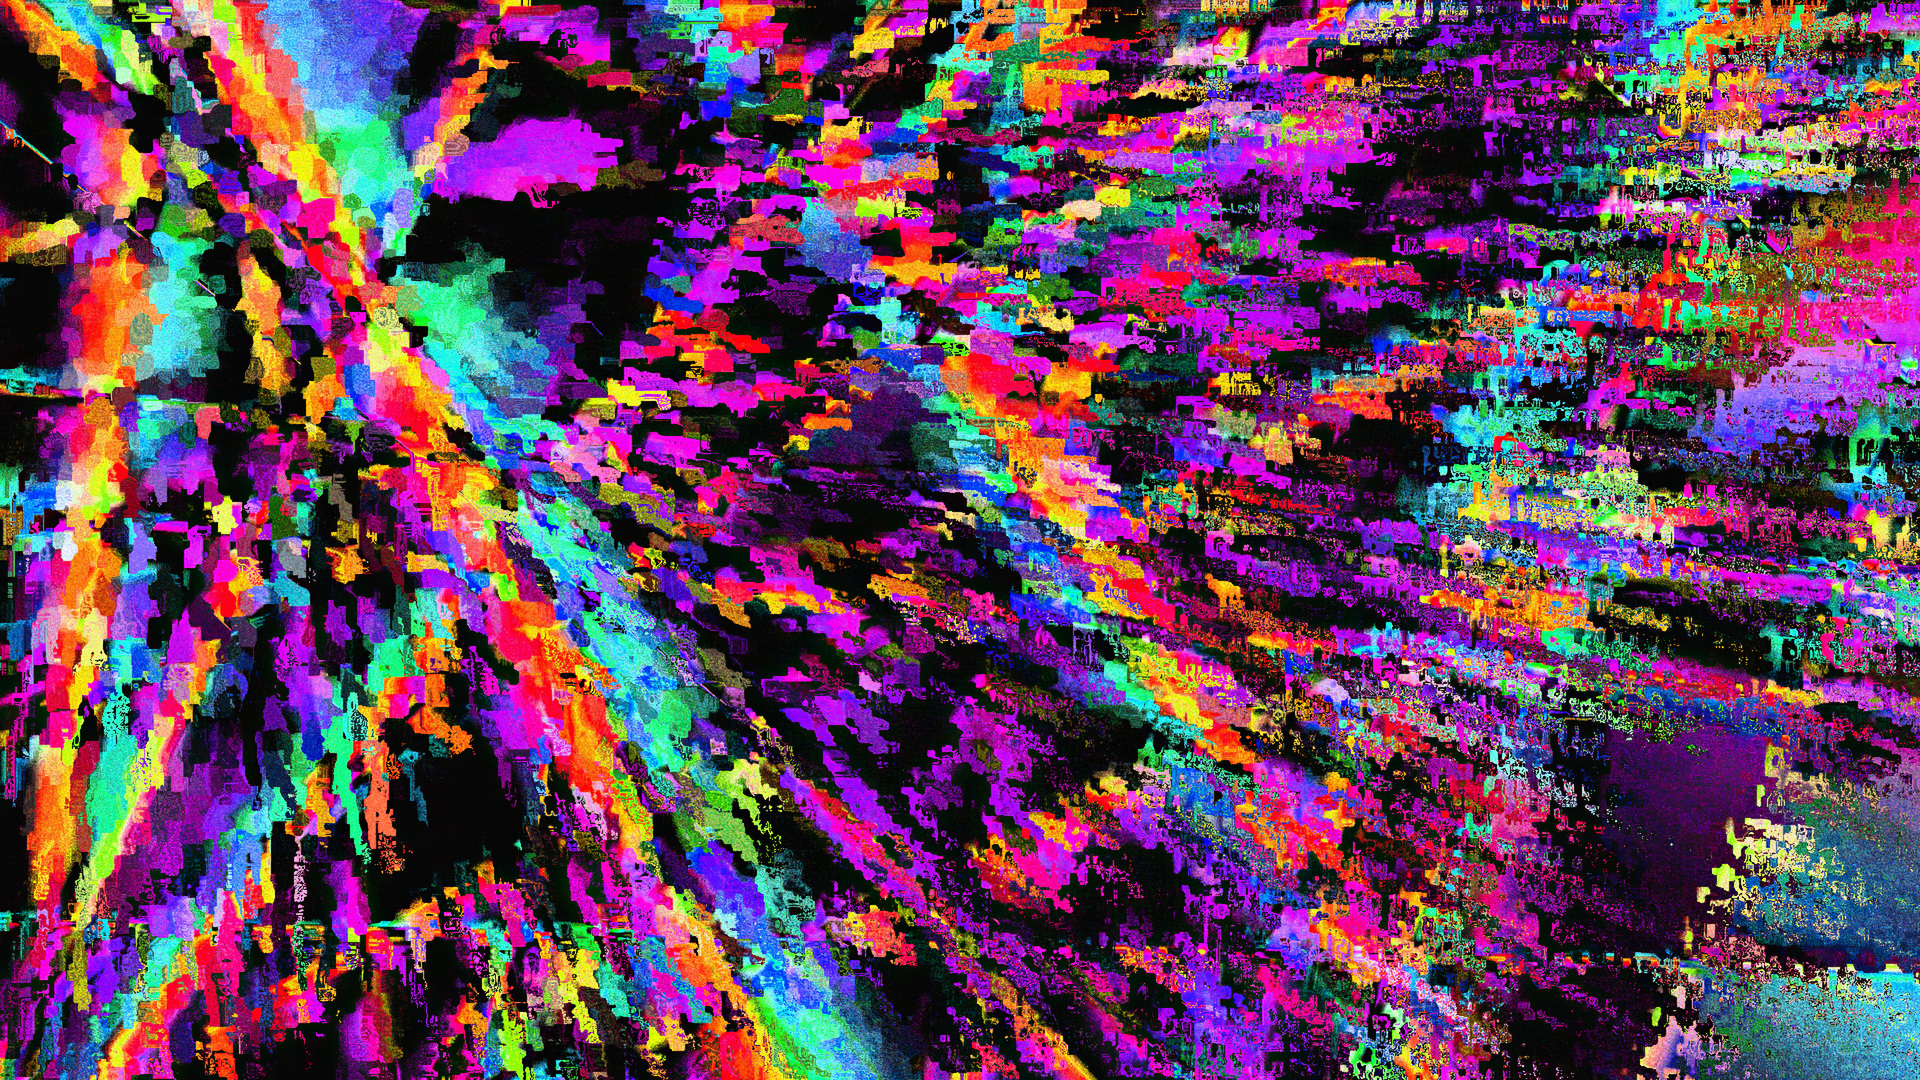 60+ Artistic Glitch HD Wallpapers and Backgrounds